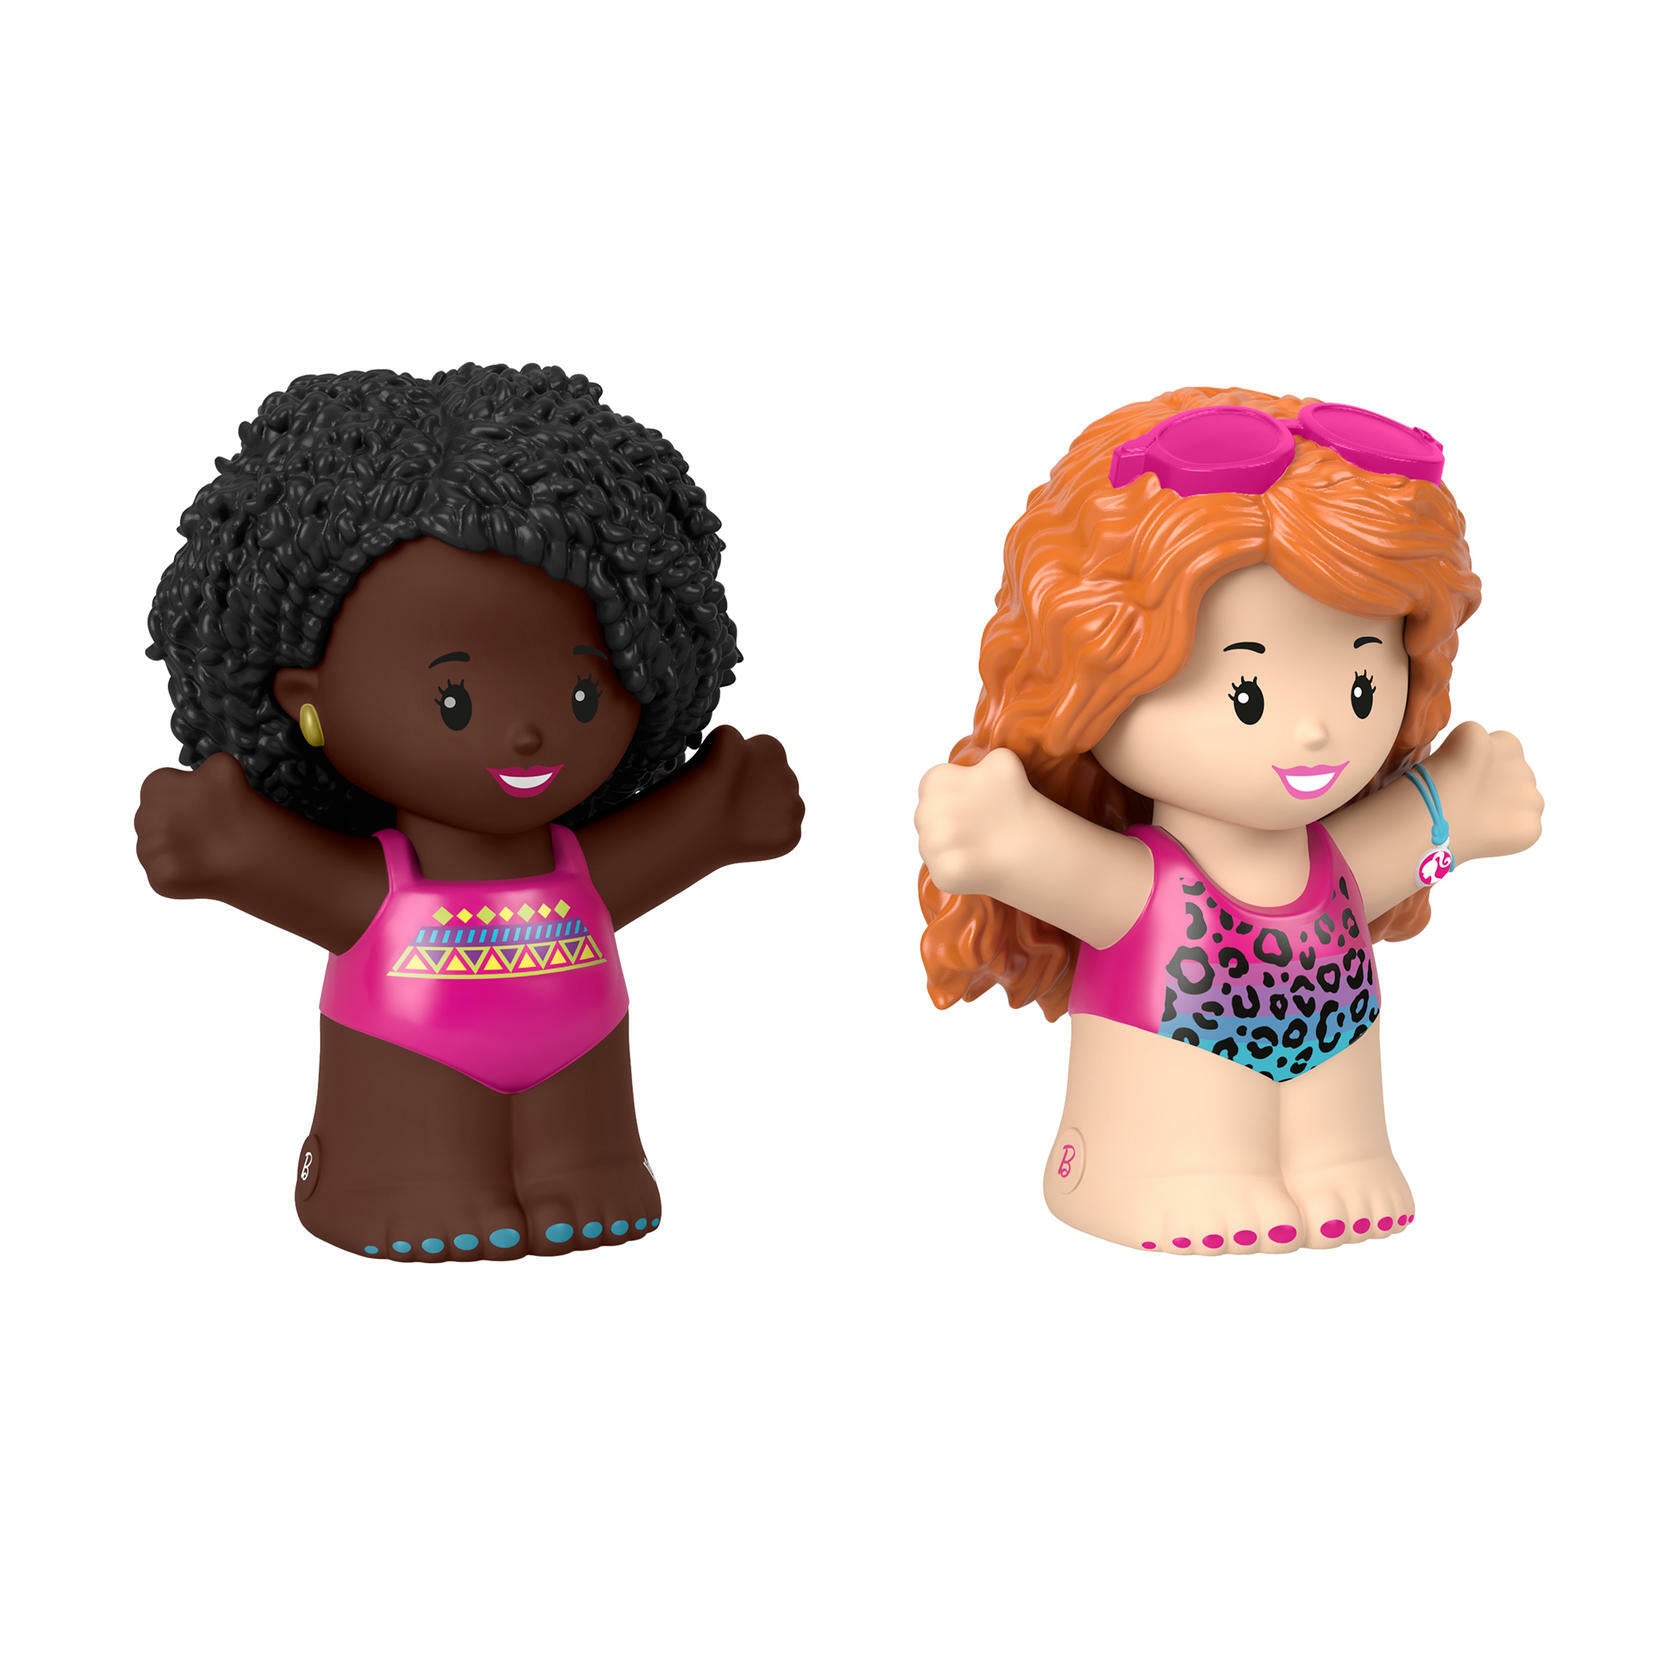 Fisher-Price Little People Barbie Toddler Toys Swimming Figure Pack,2 Characters for Pretend Play Ages 18+ Months